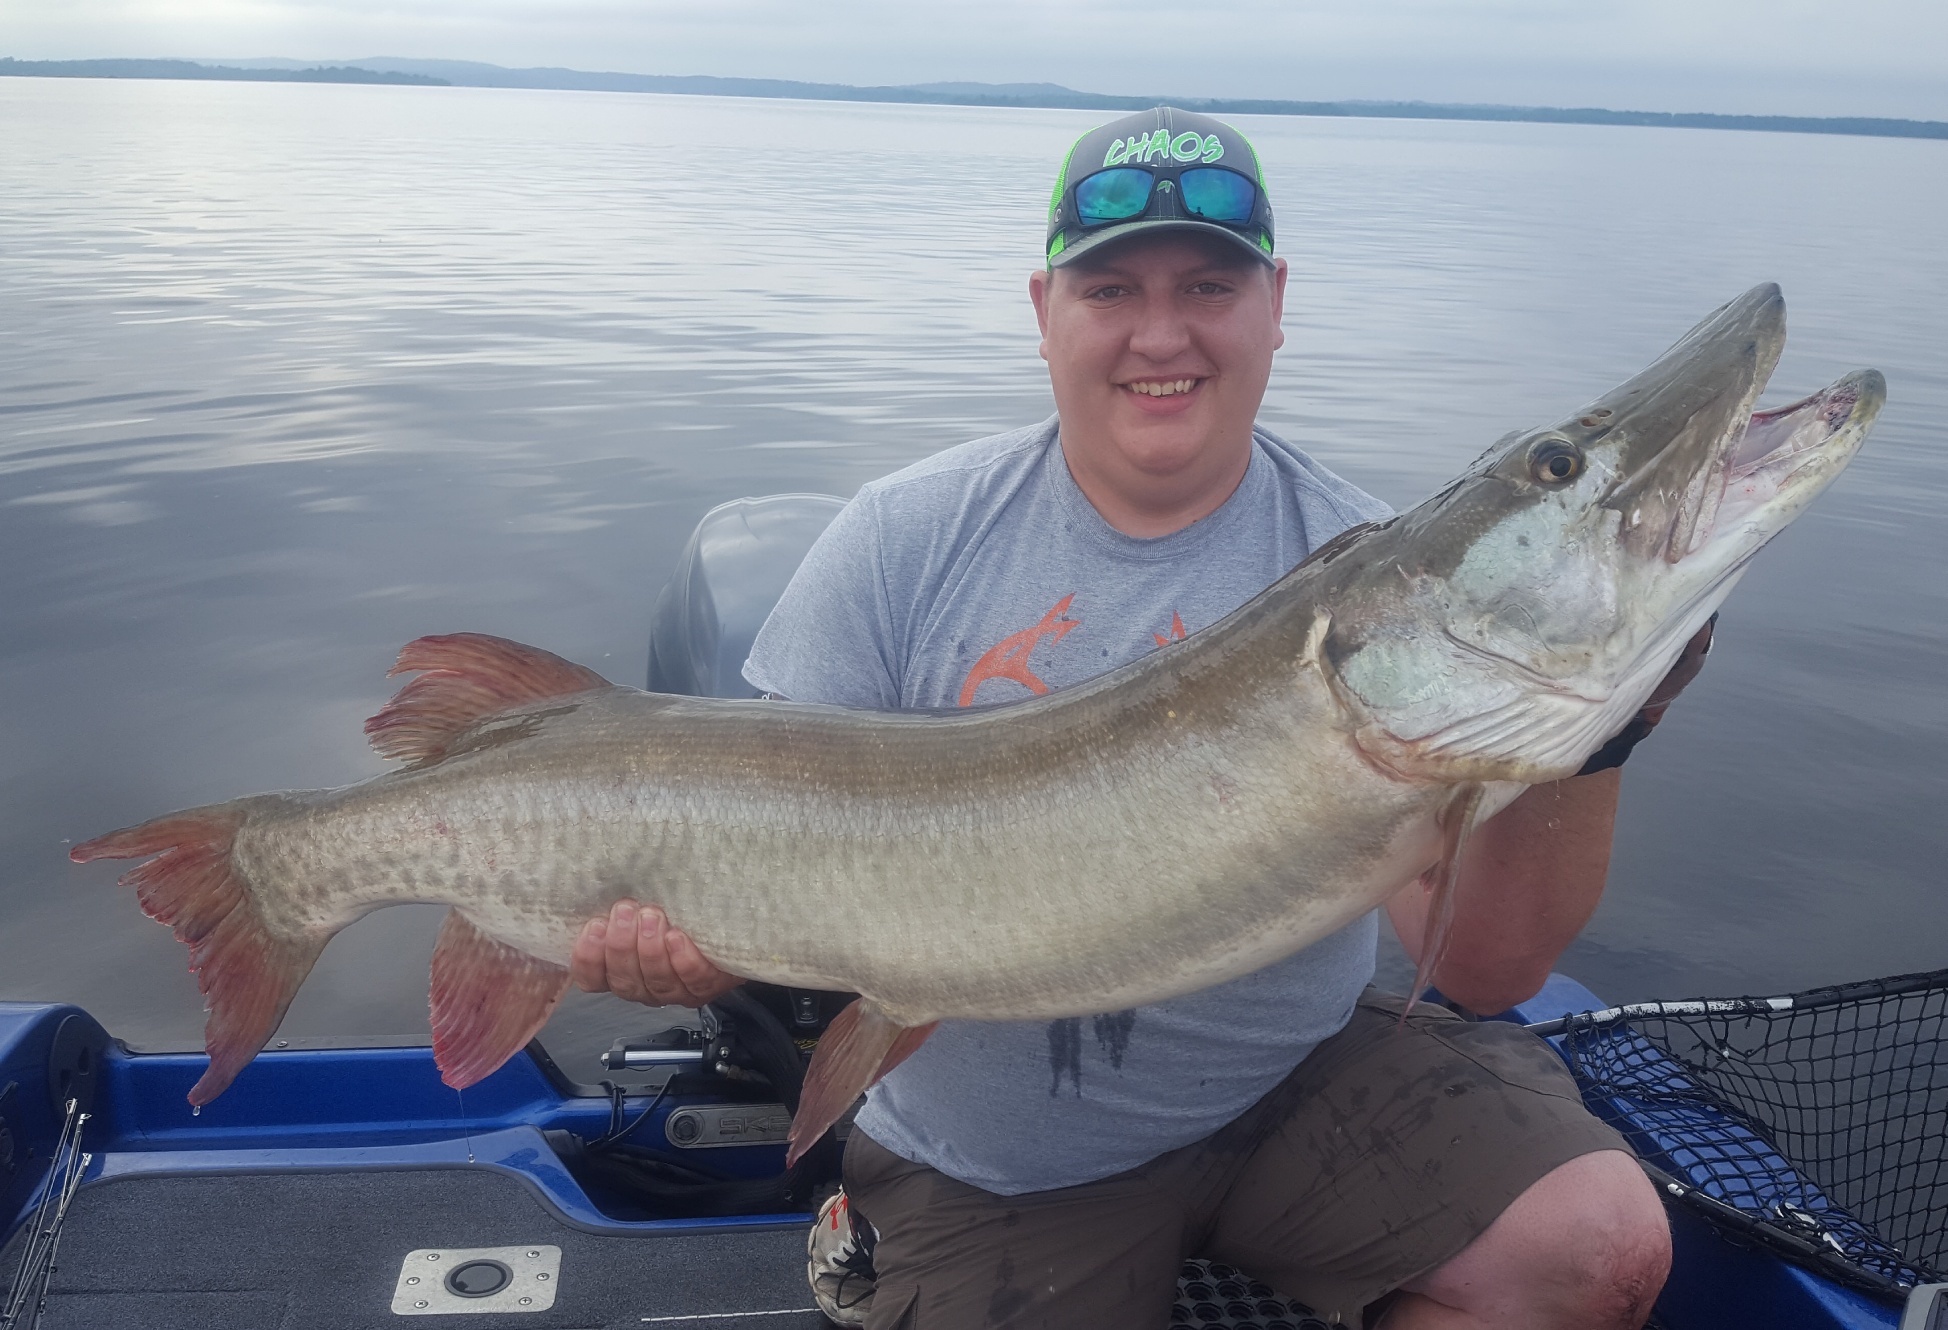 Gentleman smiling on a fishing boat holding a large muskie that he caught with one of the best minnesota muskie guides